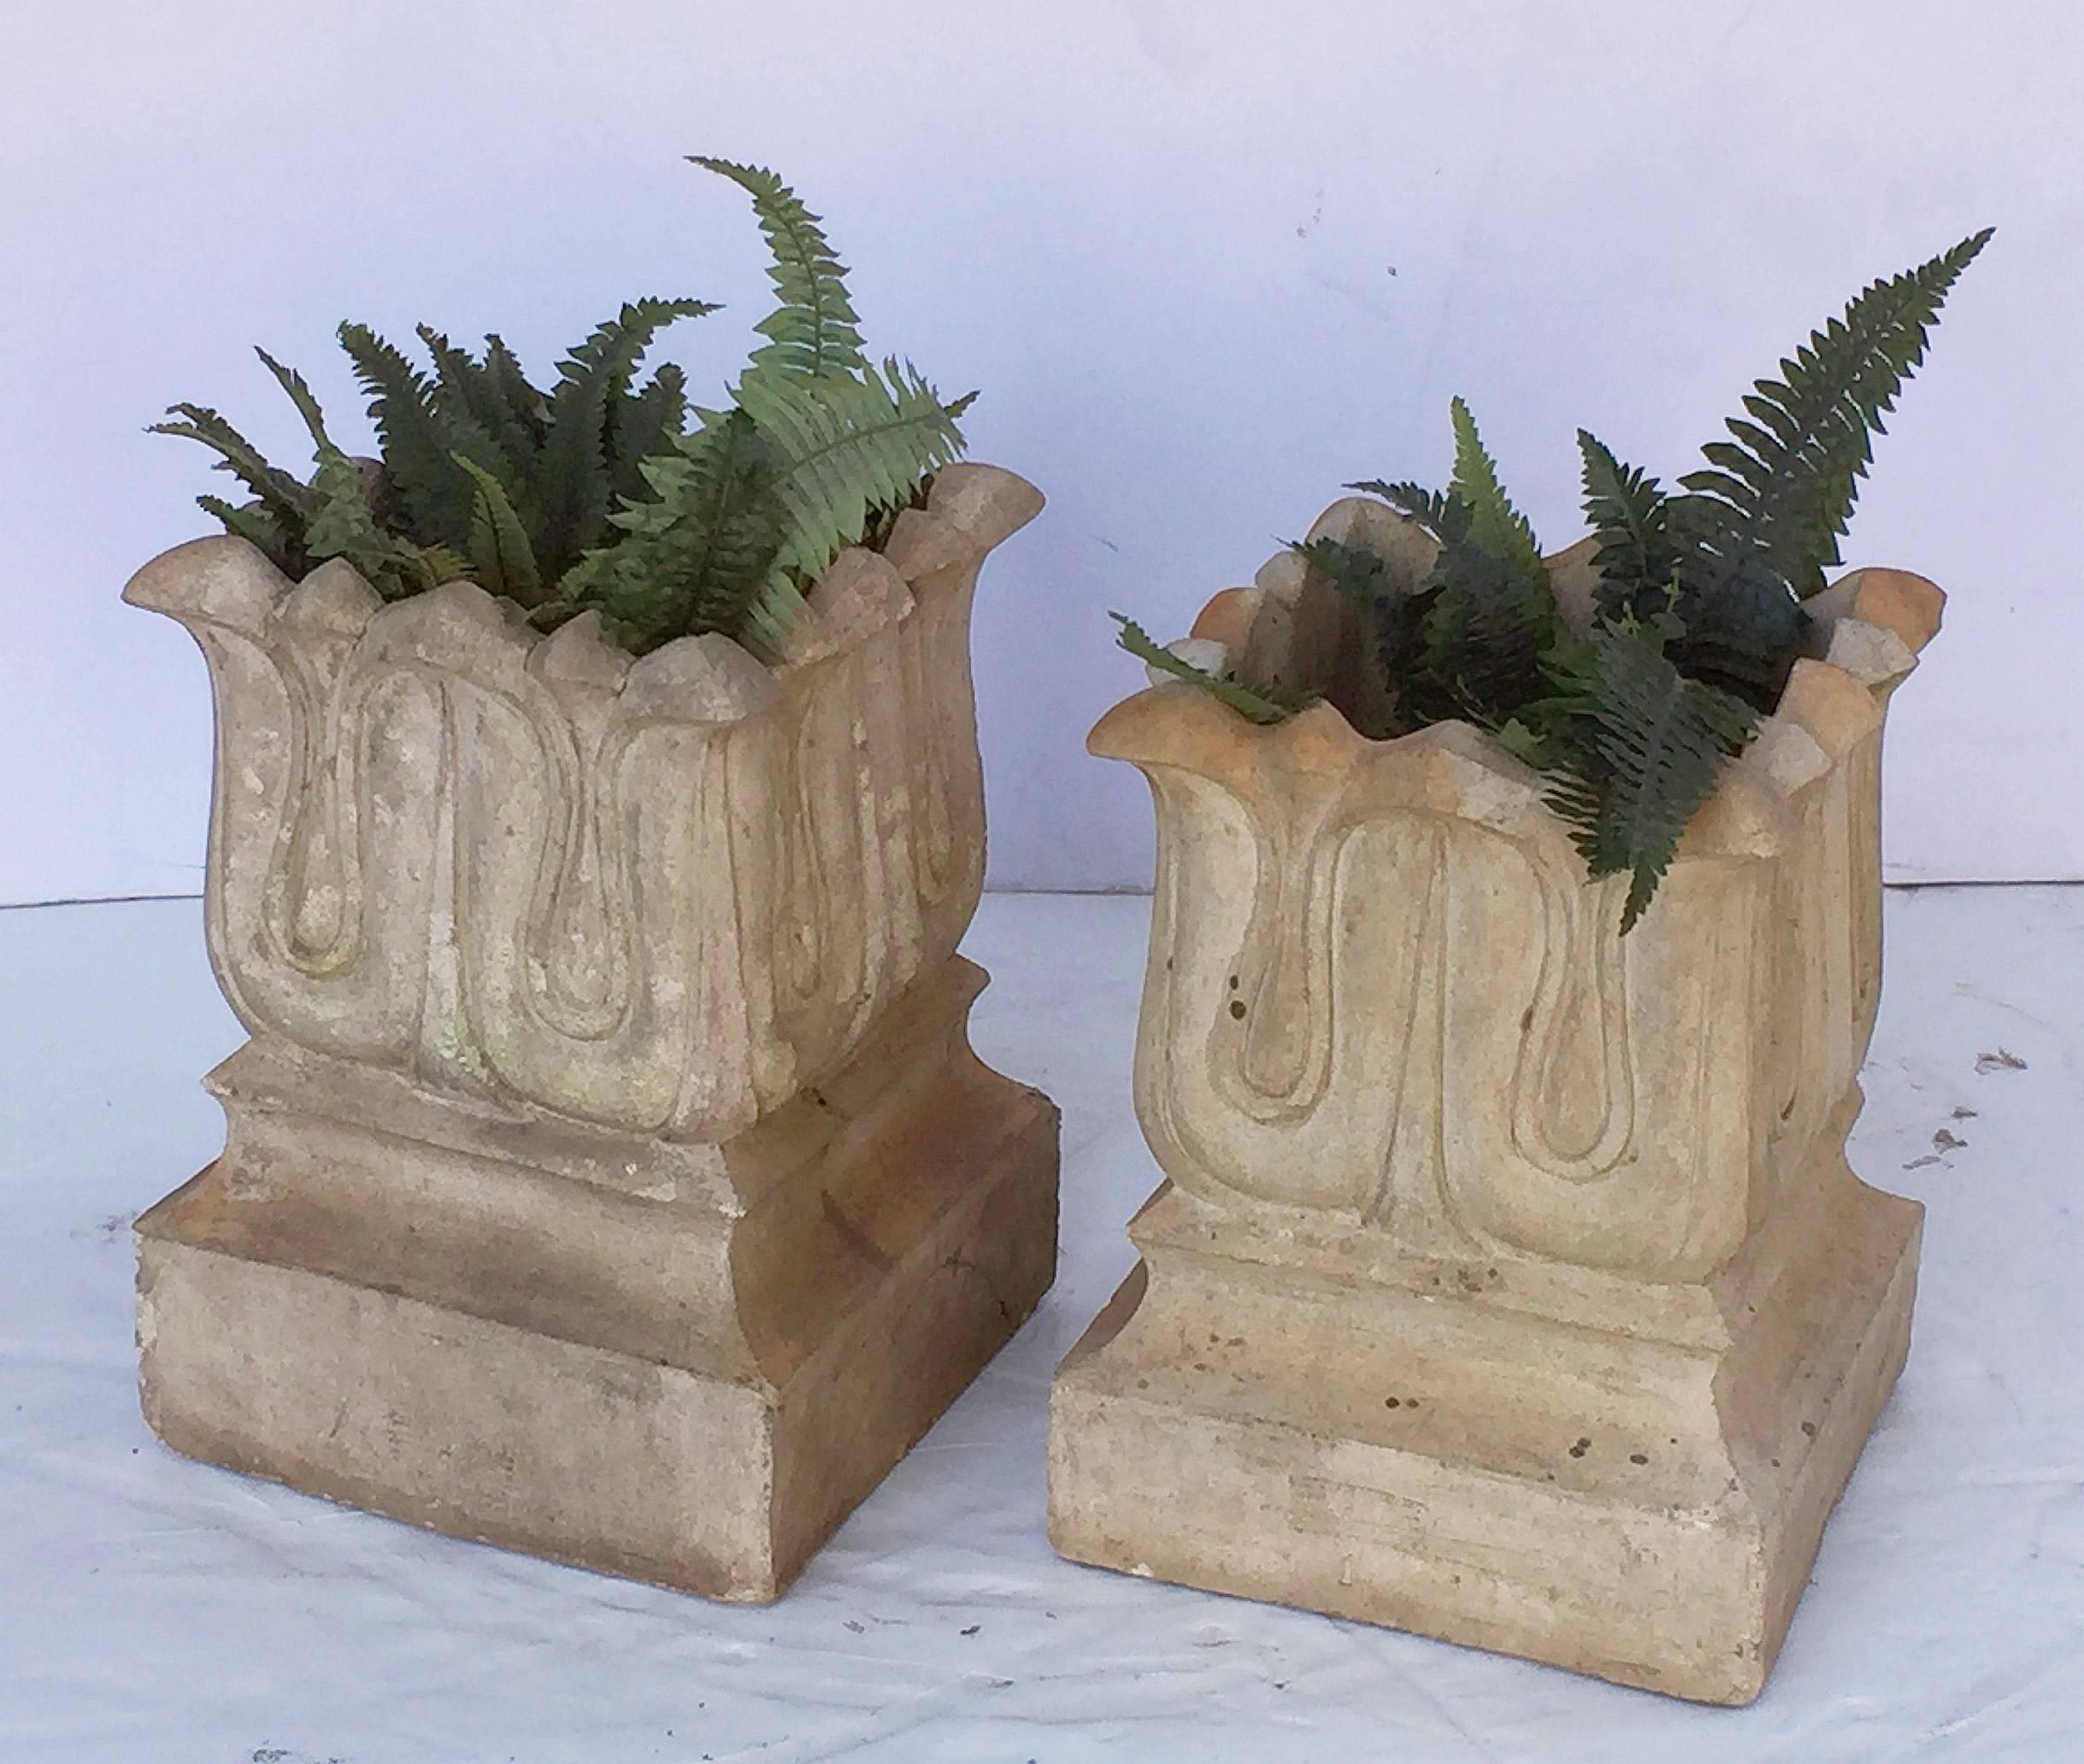 A pair of terra cotta garden planter pots or square urns manufactured by the celebrated ornamental terracotta designer and manufacturer, John Marriott Blashfield. Each vase featuring a Classical stylized lotus design on plinth base.

Priced